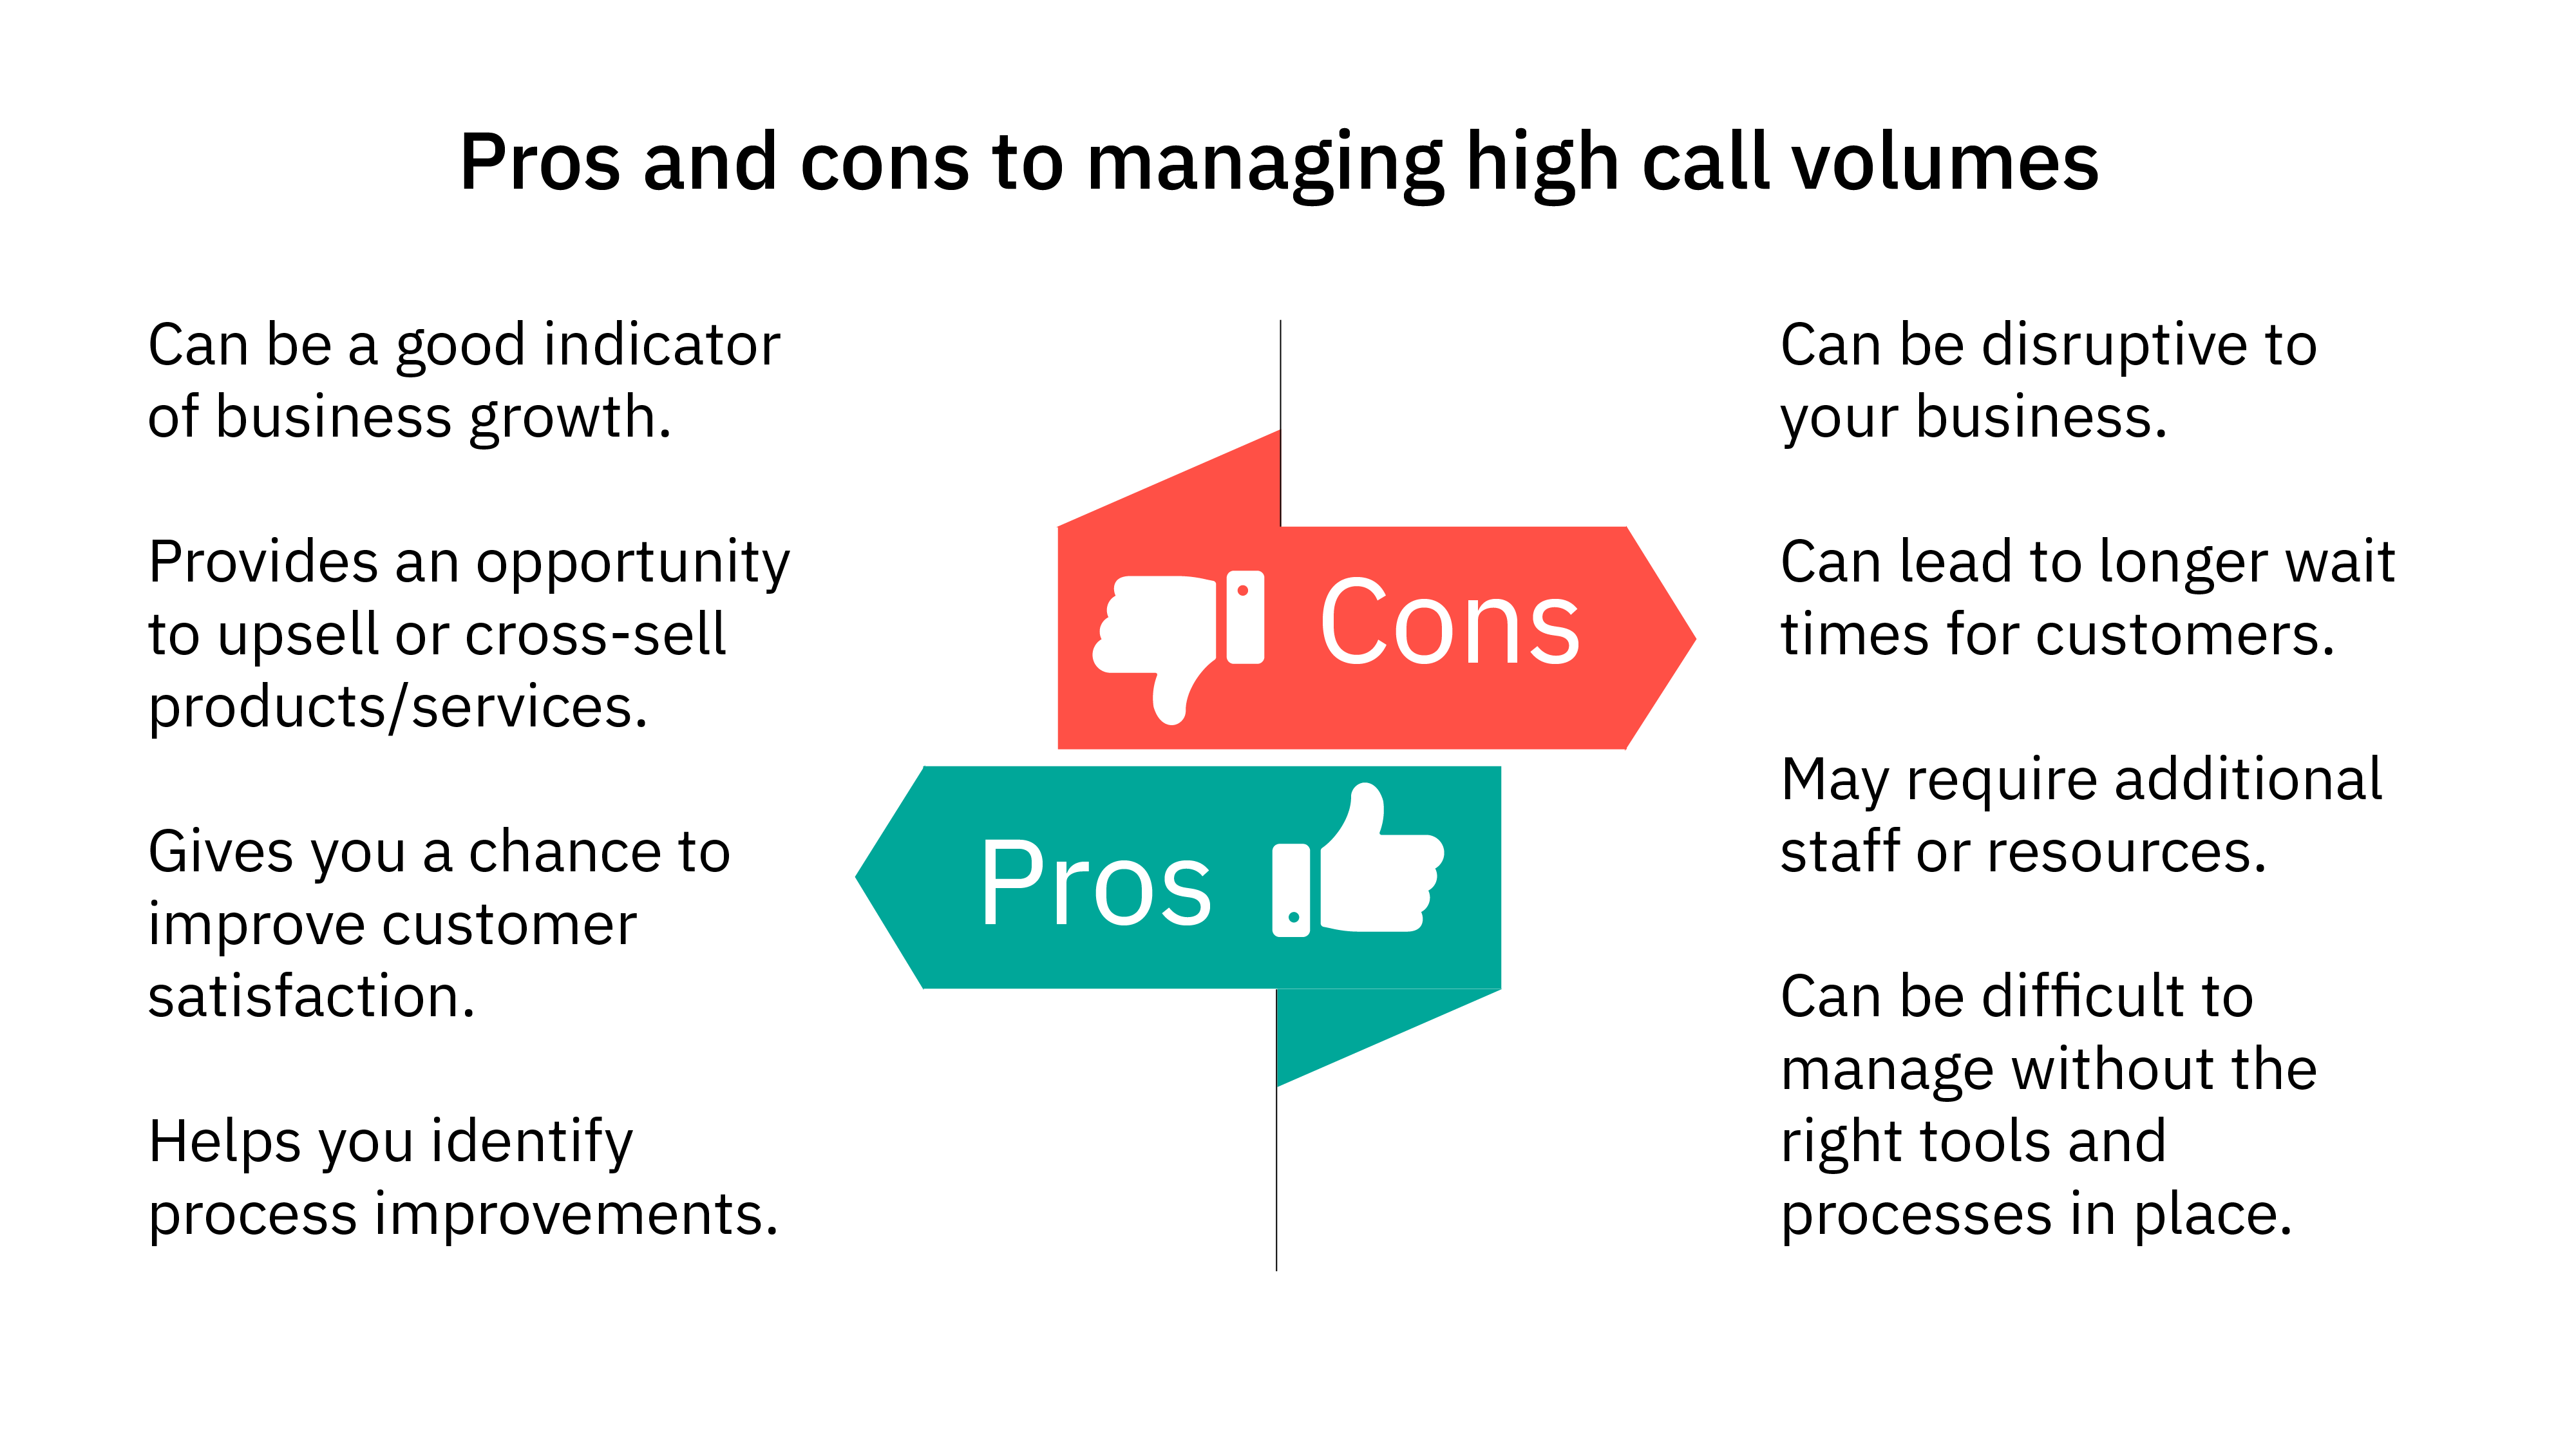 Pros and cons to managing high call volumes.